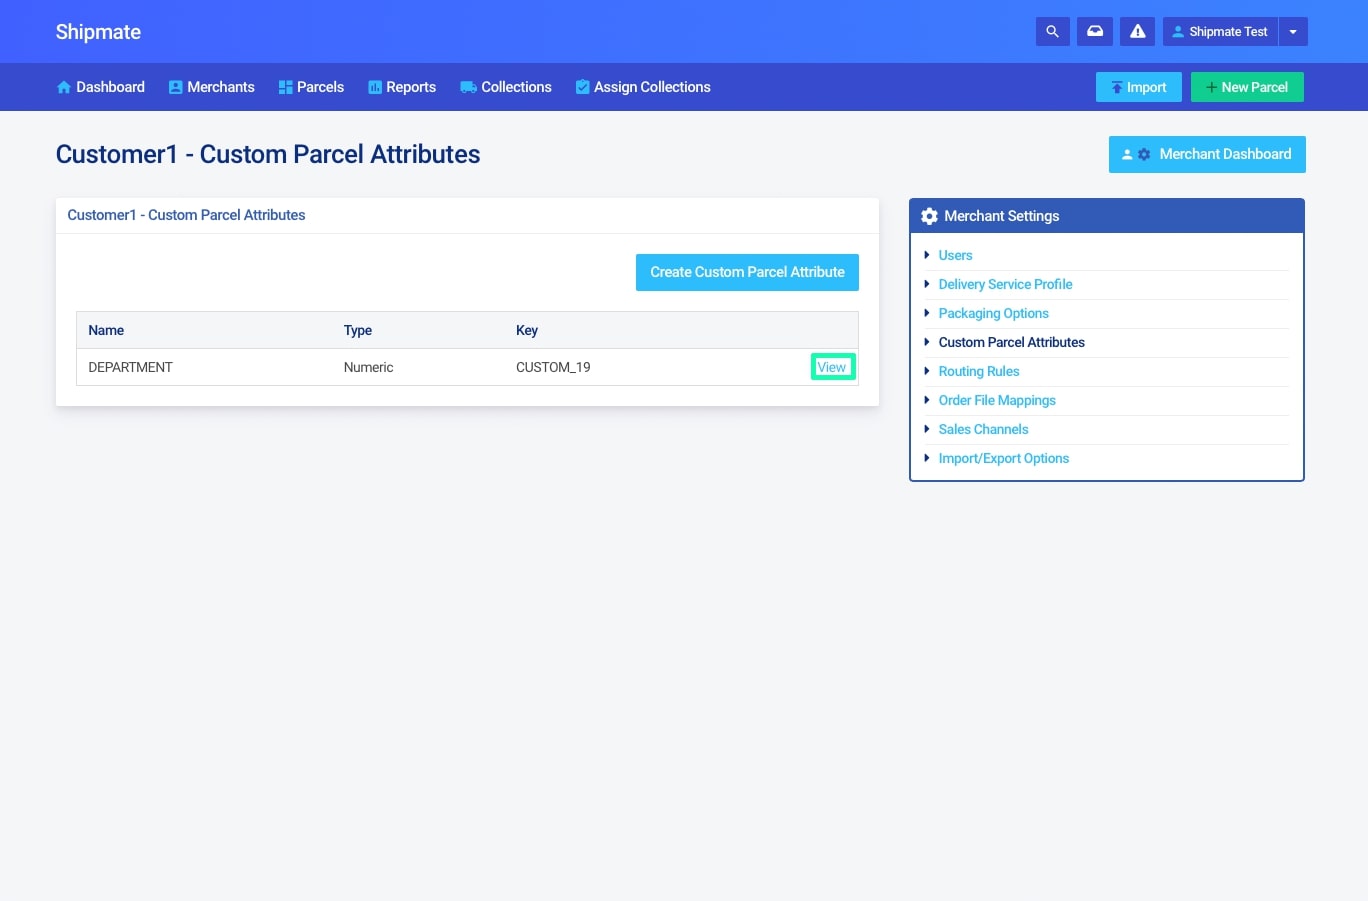 Shipmate - Your Account - Editing Custom Parcel Attributes